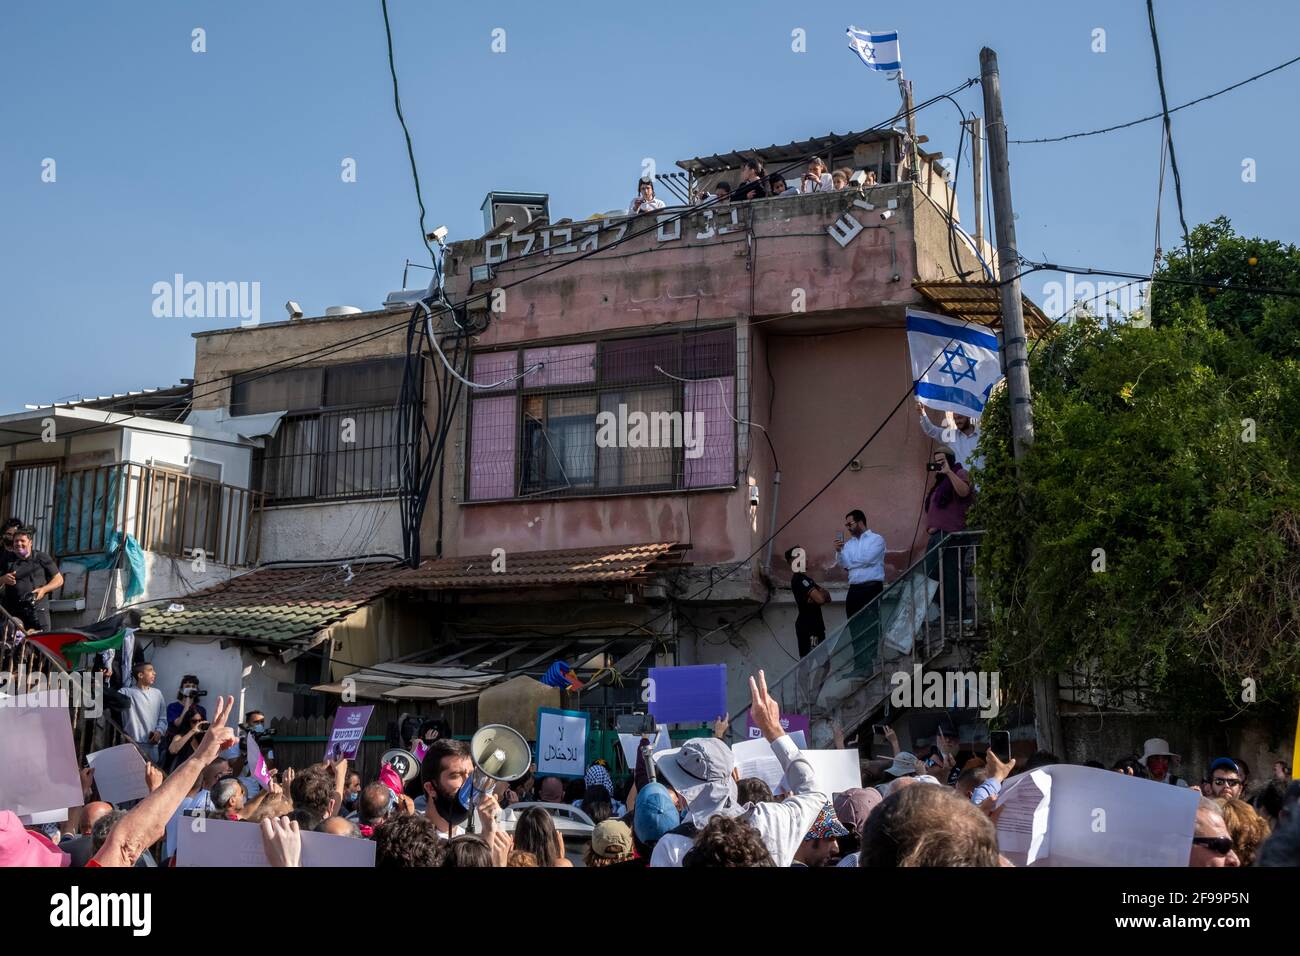 Israeli left-wing activists hold up placards in front of a house which was occupied by Jewish settlers during a demonstration against settlement activity in Sheikh Jarrah a predominantly Palestinian neighborhood on April 16, 2021, in East Jerusalem, Israel. The Palestinian neighborhood of Sheikh Jarrah is currently the center of a number of property disputes between Palestinians and Israelis. Some houses were occupied by Israeli settlers following a court ruling. Stock Photo